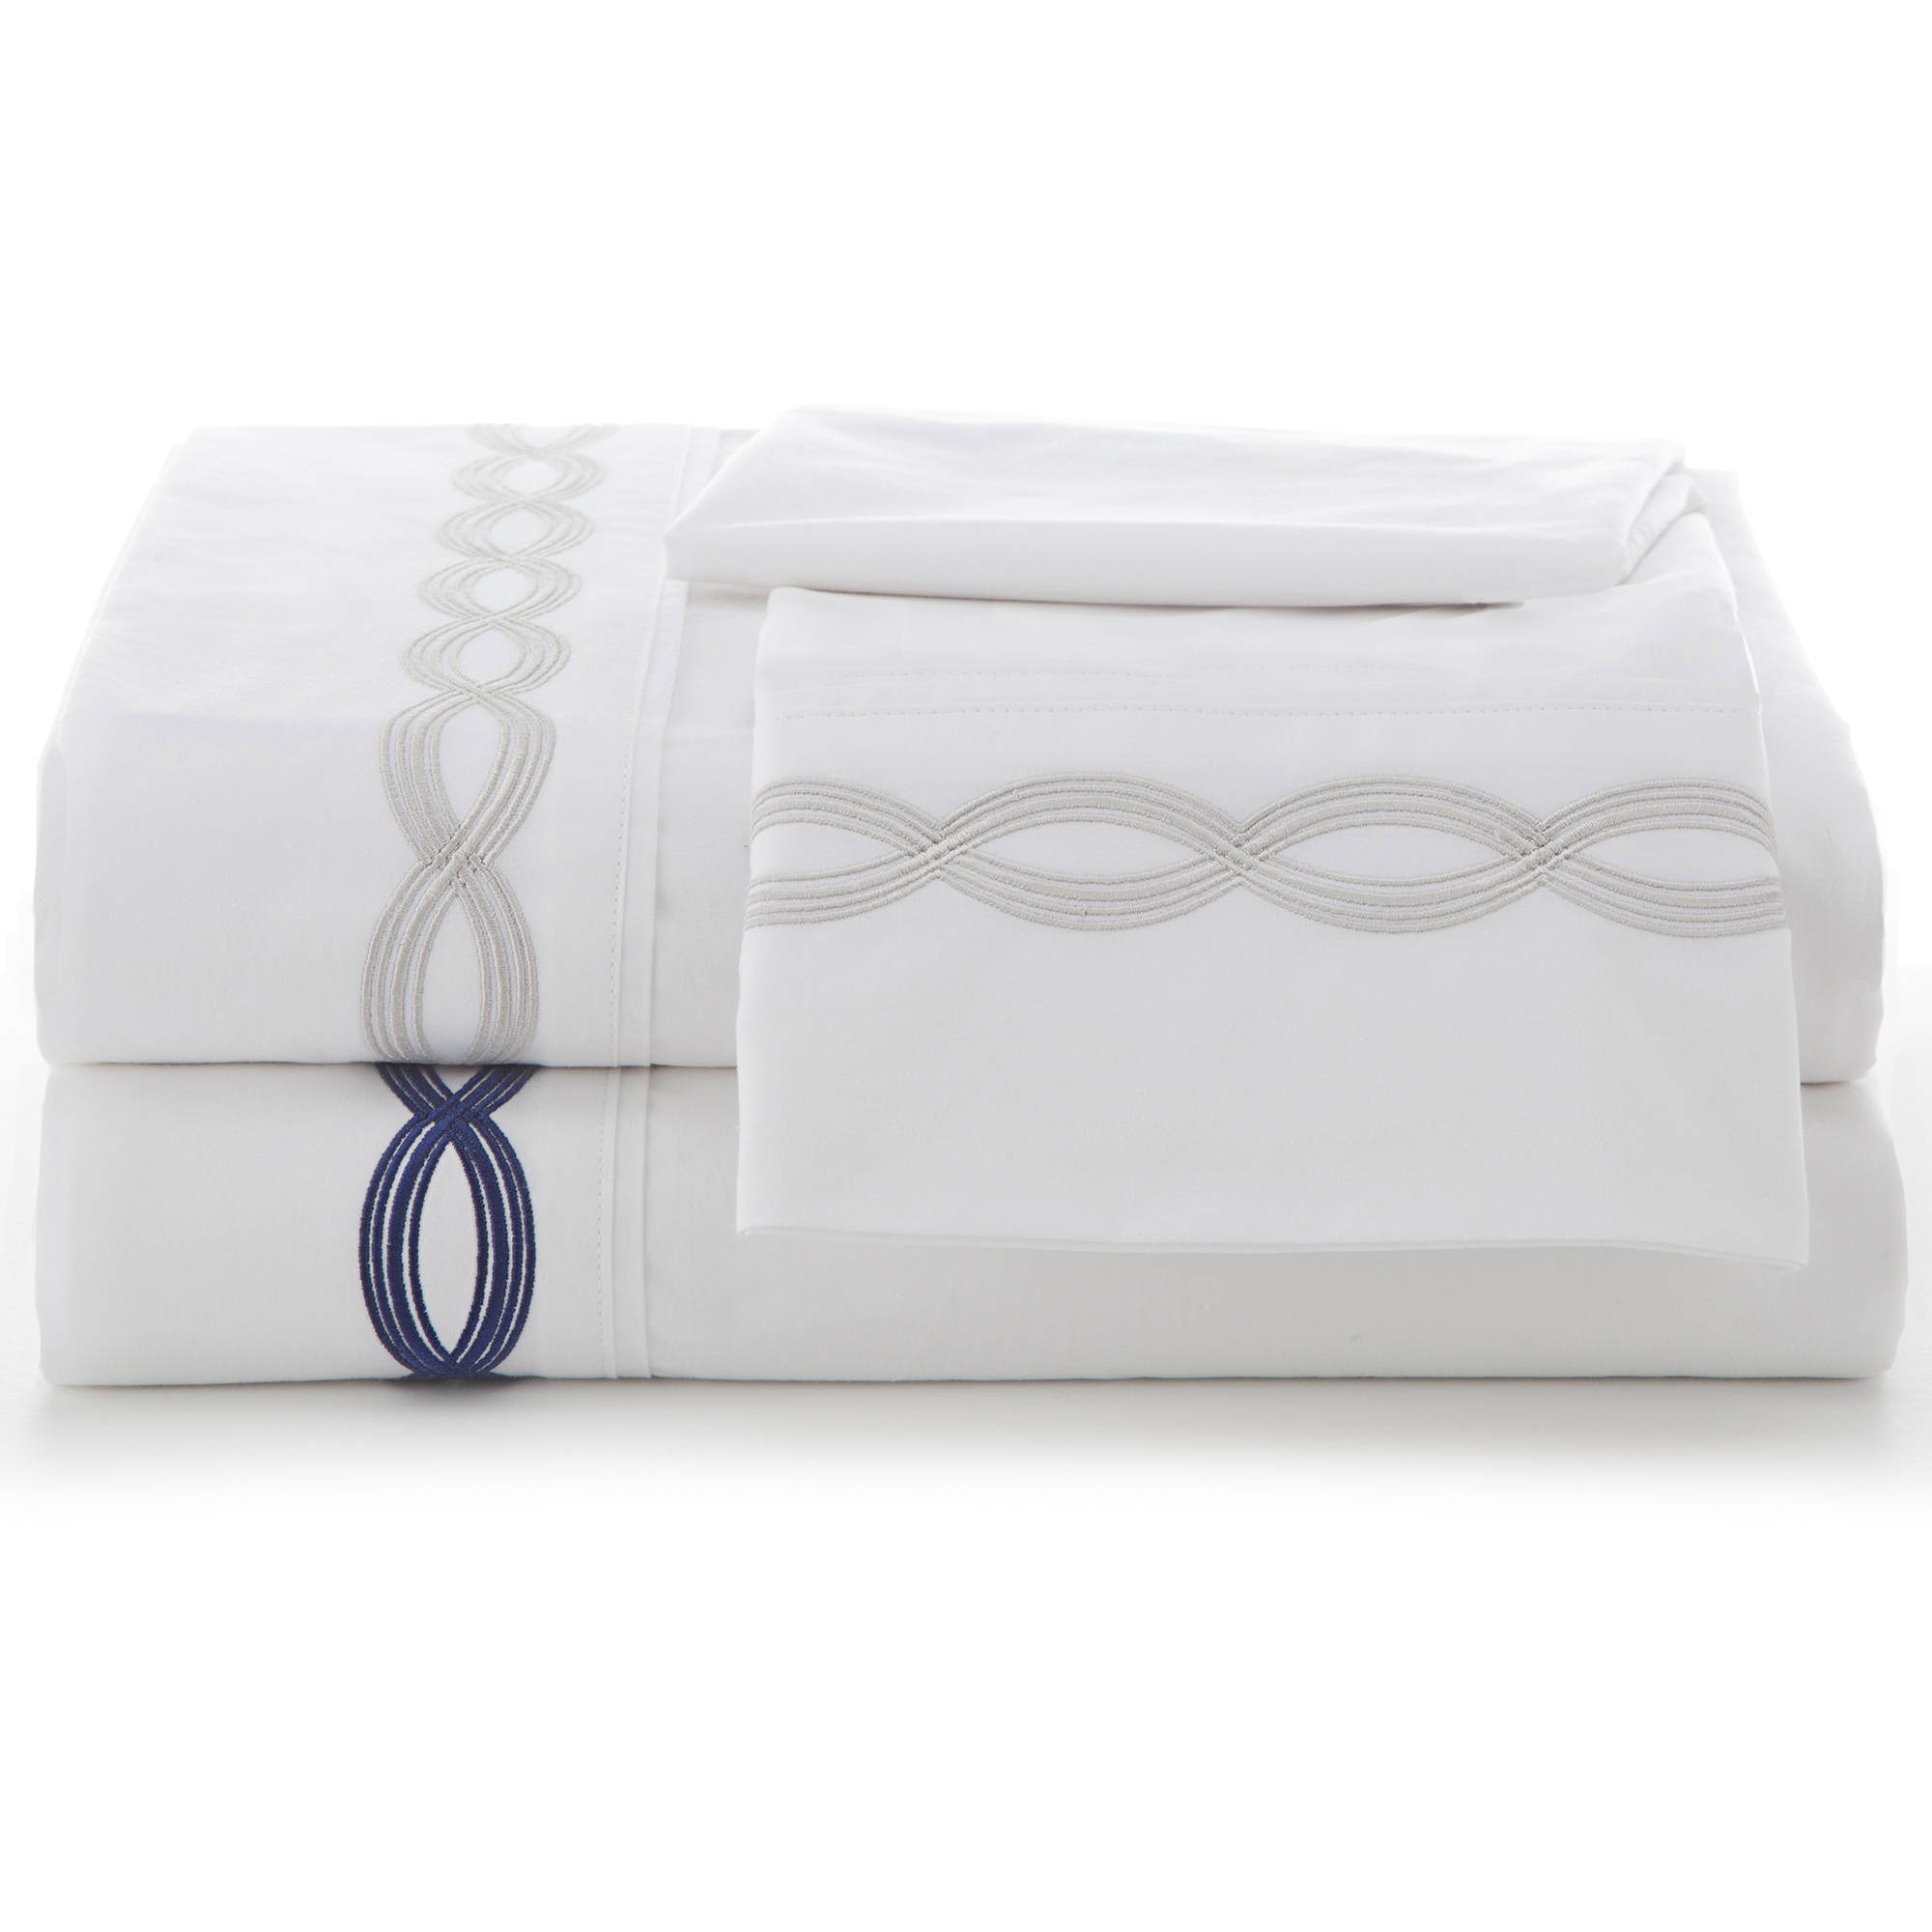 LINEN GALAXY /® T200 EGYPTIAN COTTON WHITE FITTED SHEET DOUBLE WITH PAIR OF PILLOW CASES